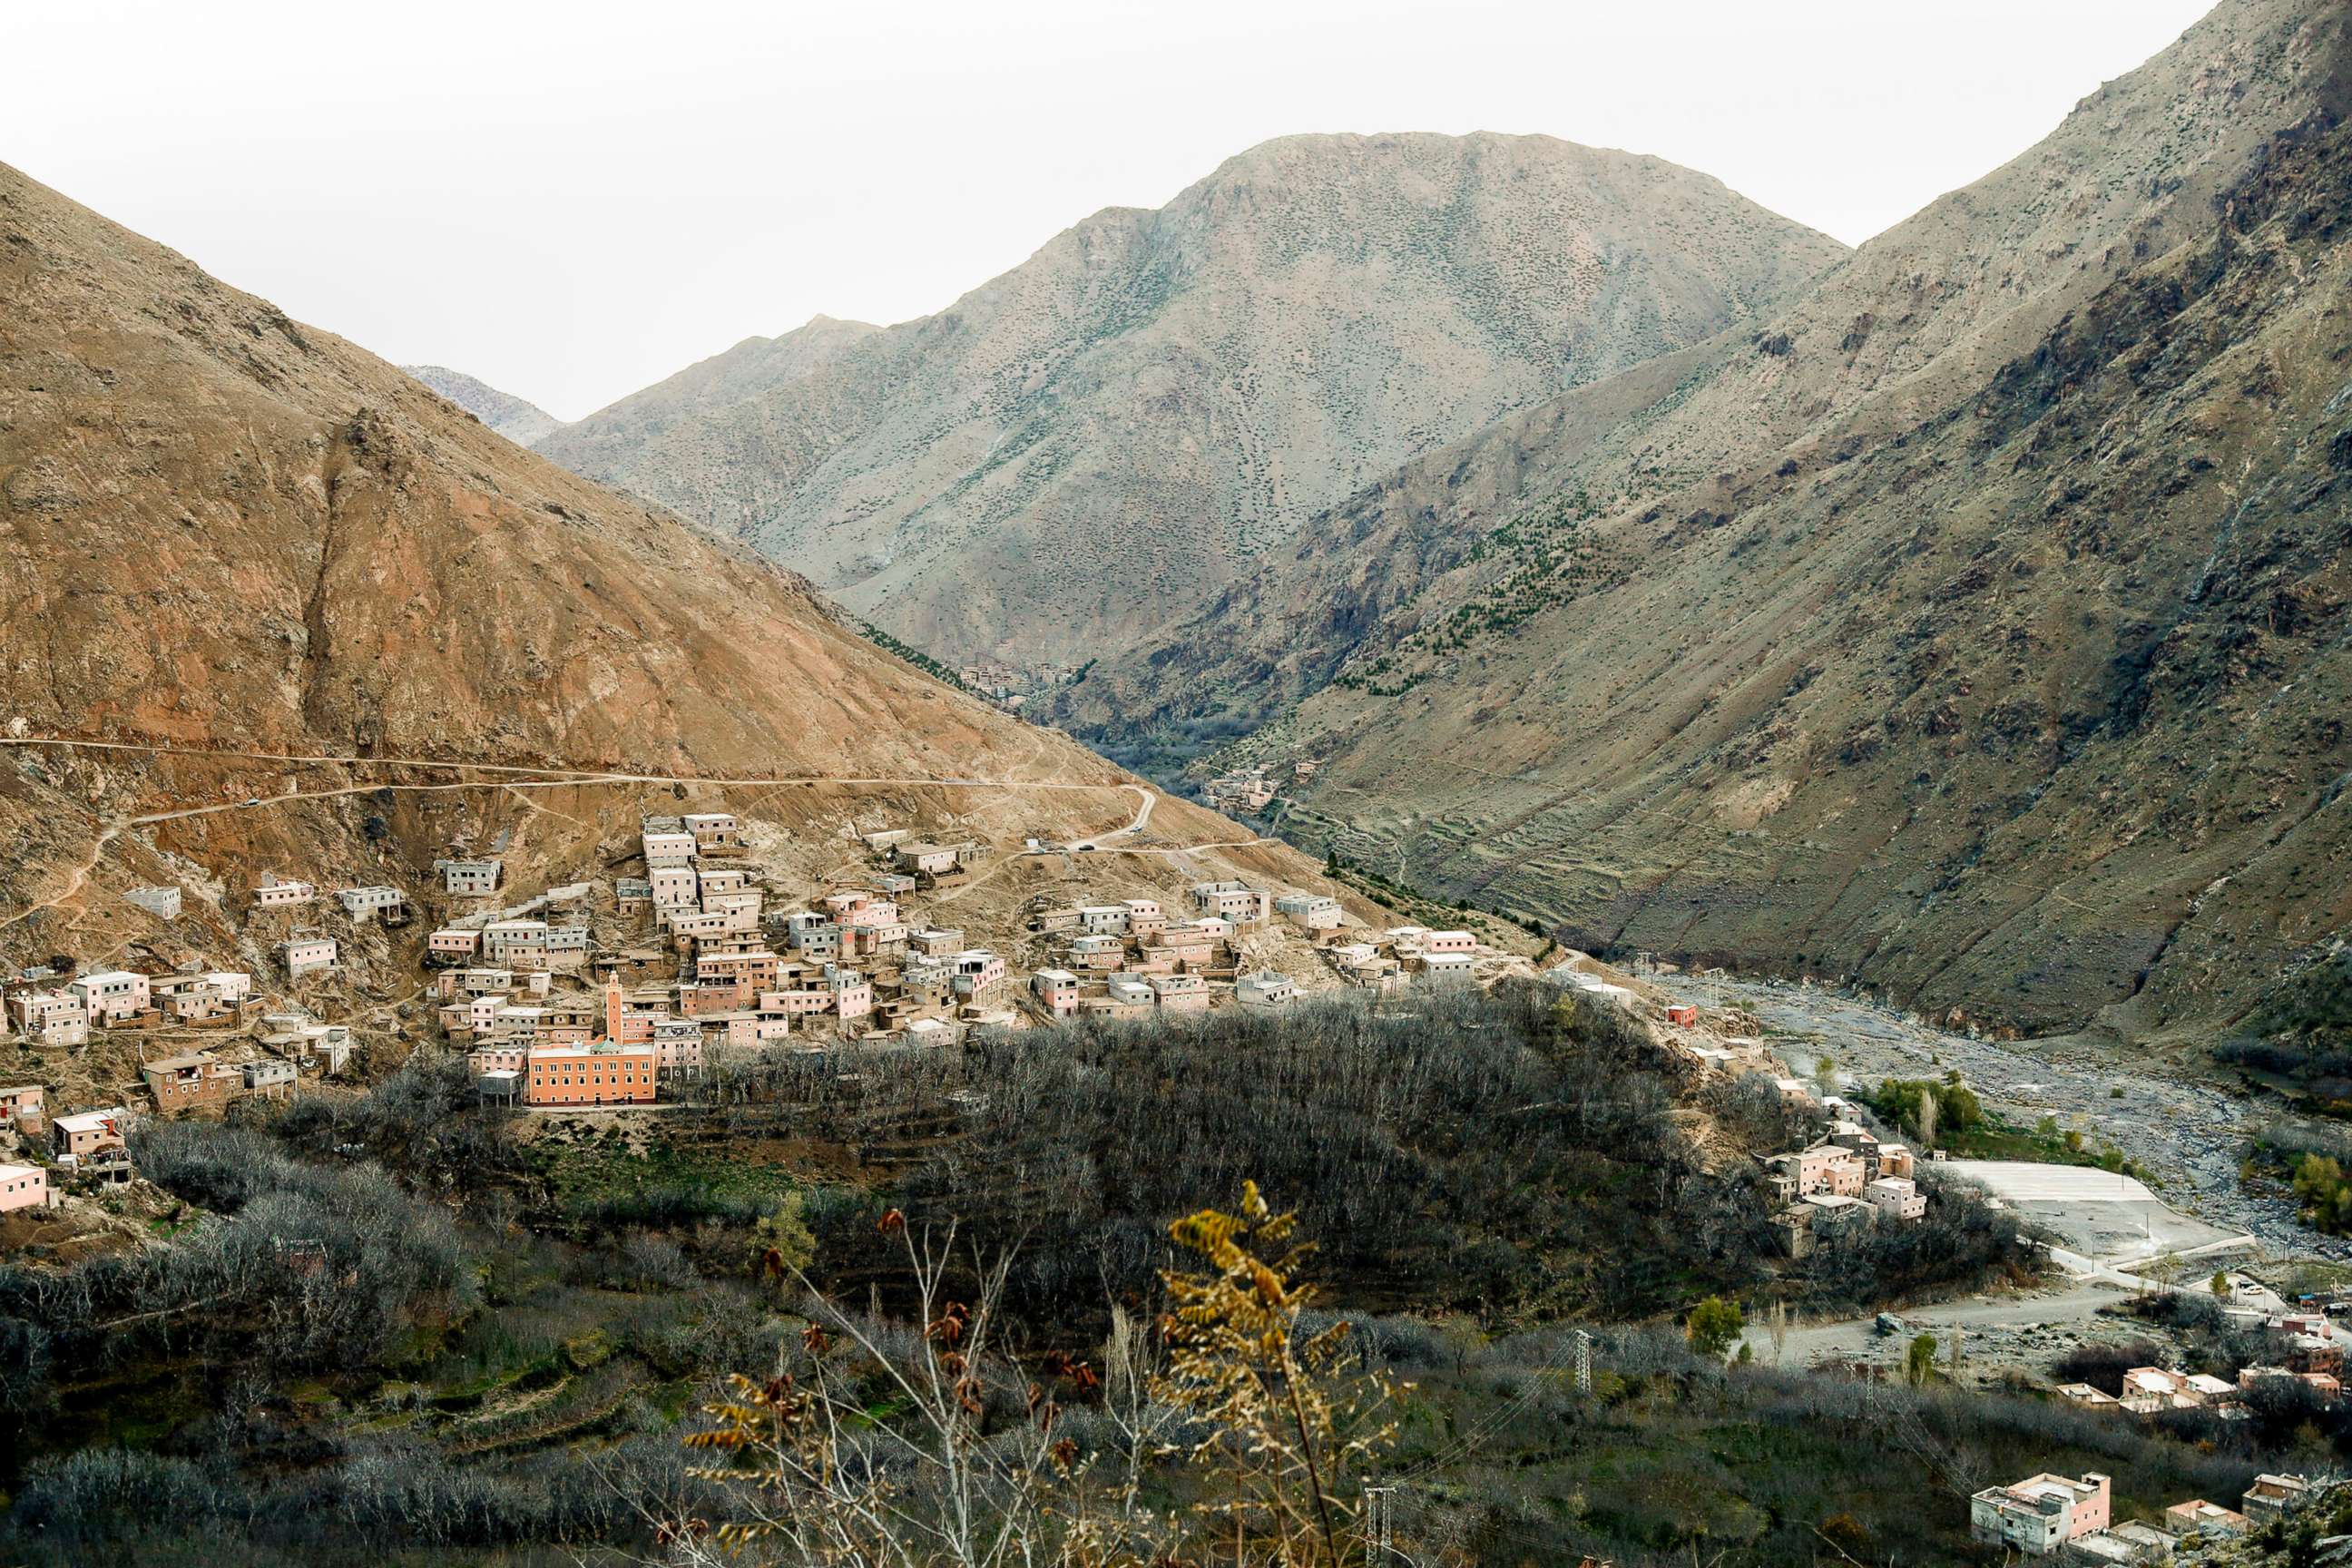 PHOTO: The remote village of Imlil nestled on the slopes of the Atlas mountains in Morocco, Dec. 20, 2018, about six miles from the spot where the bodies of two Scandinavian women were found.